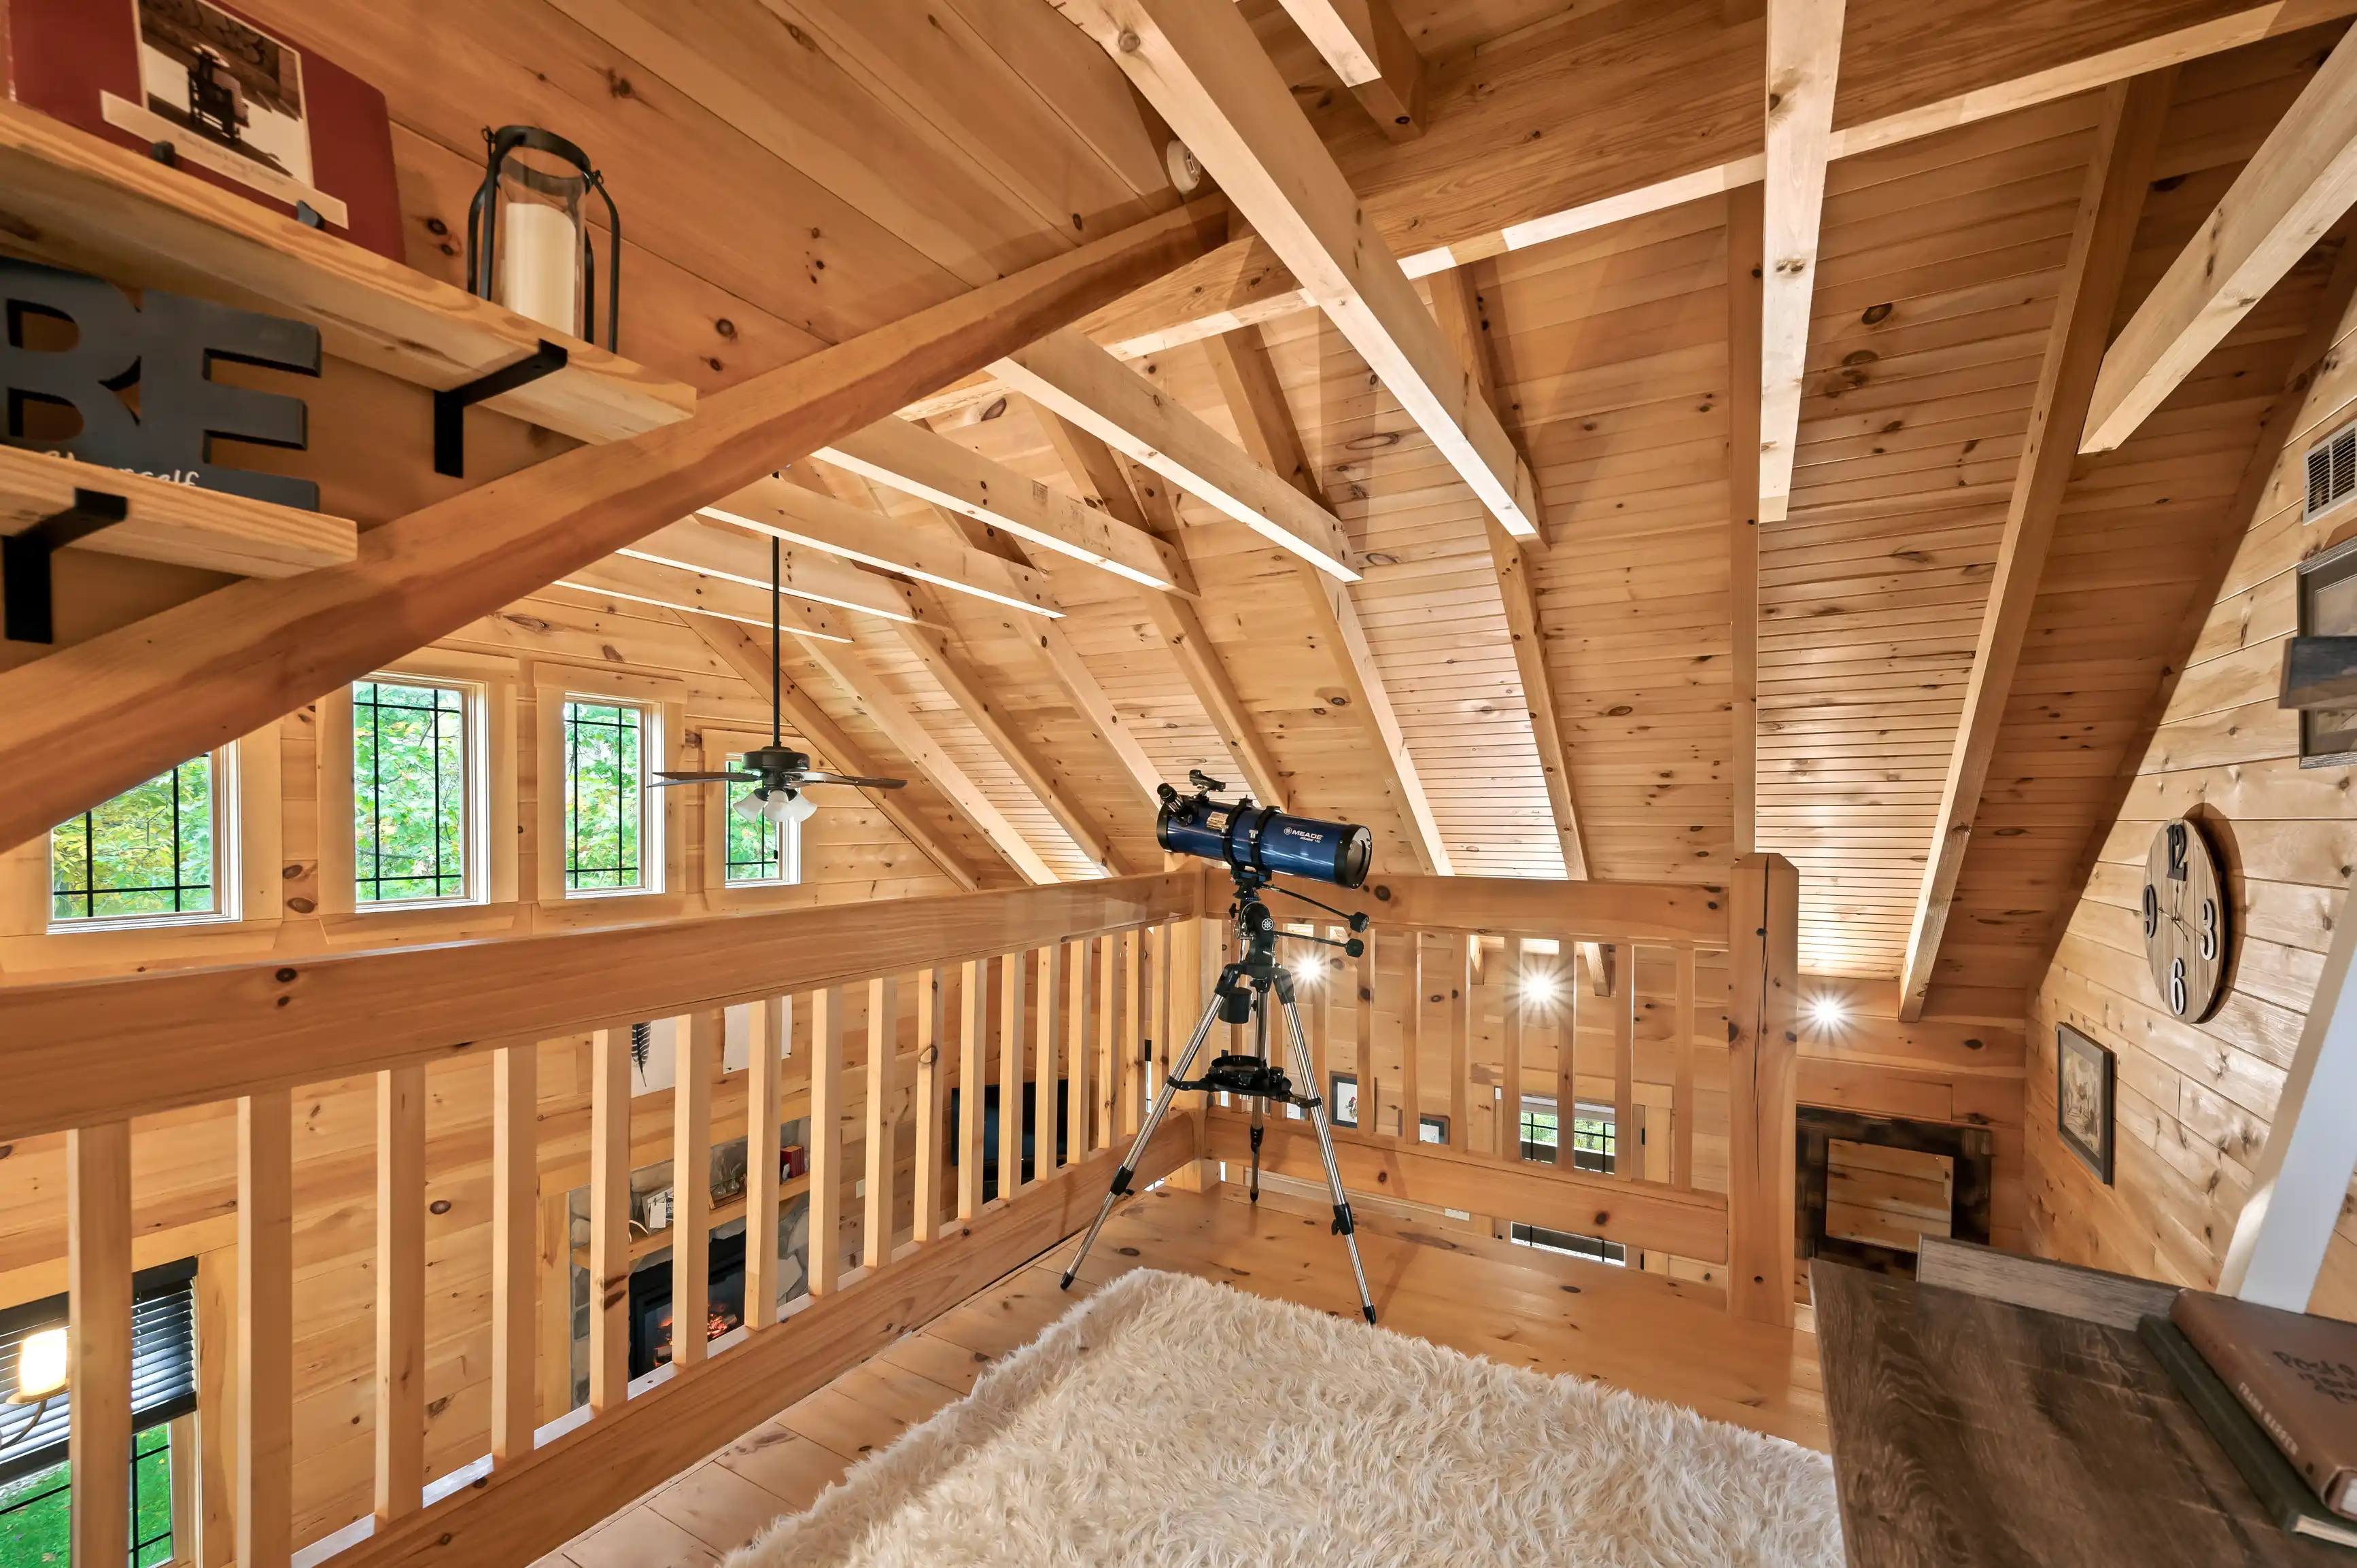 Cozy wooden attic space with exposed beams, telescope on a tripod, decorative lighting, and a glimpse of greenery through the windows.